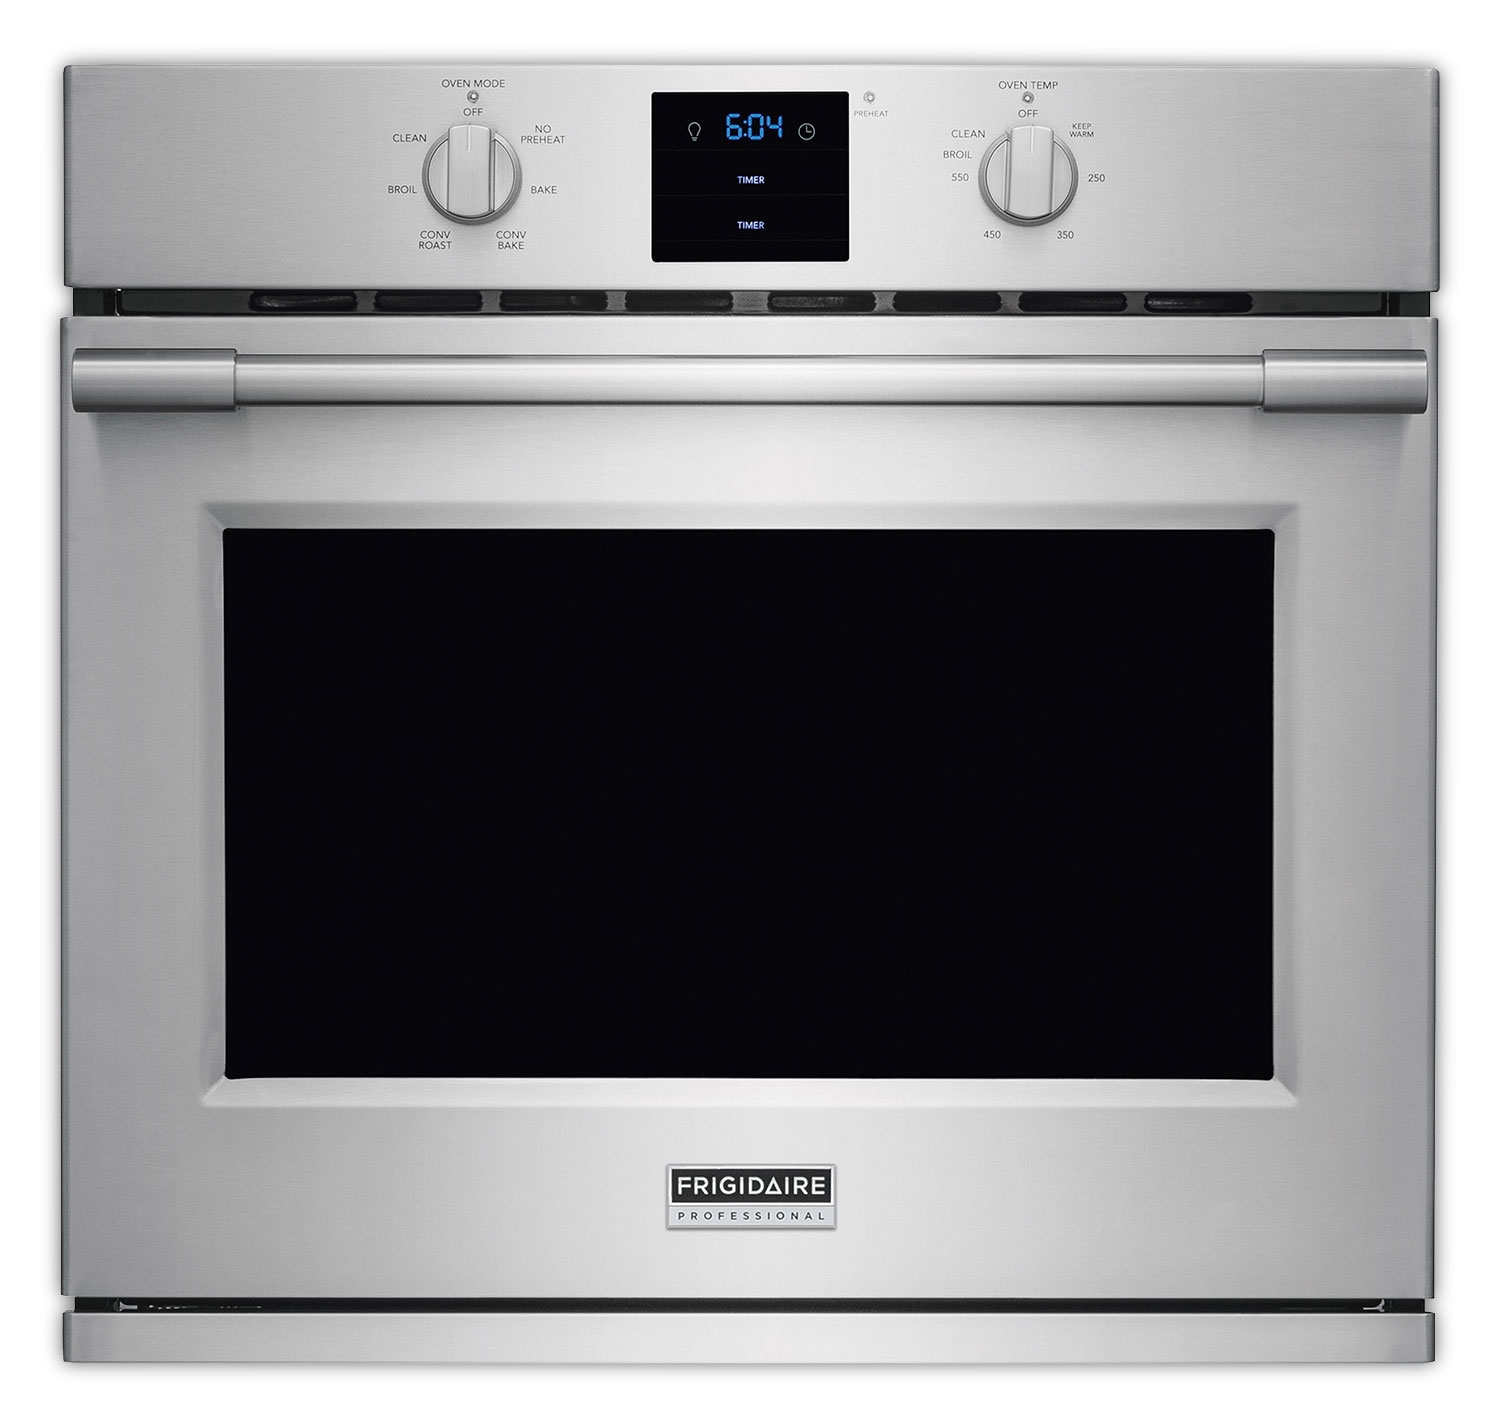 Frigidaire Professional Series - 30" Single Oven New for 2016